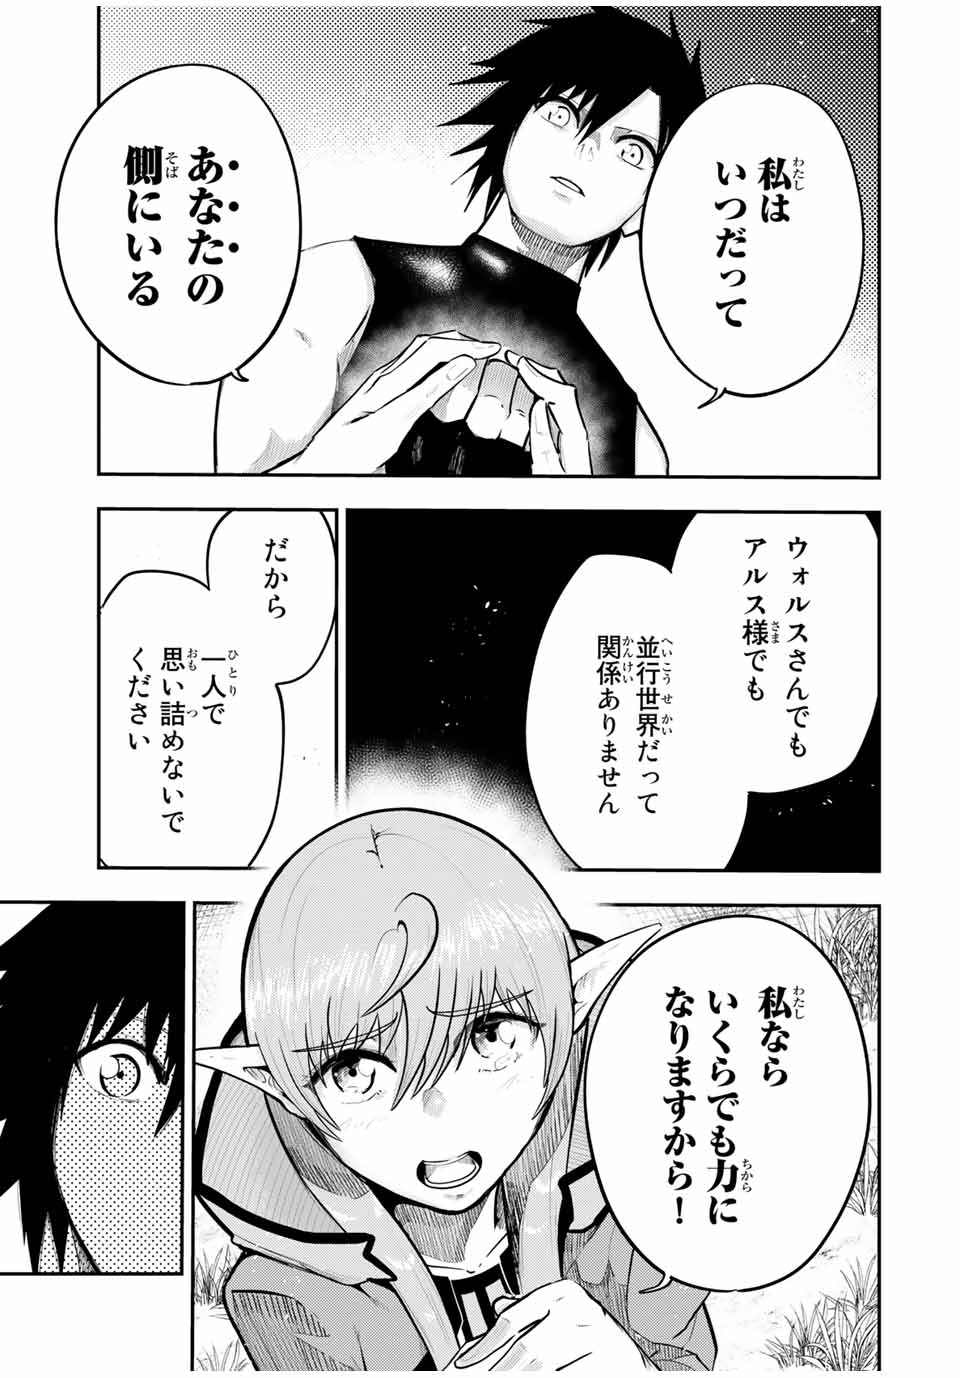 the strongest former prince-; 奴隷転生 ～その奴隷、最強の元王子につき～ 第50話 - Page 7